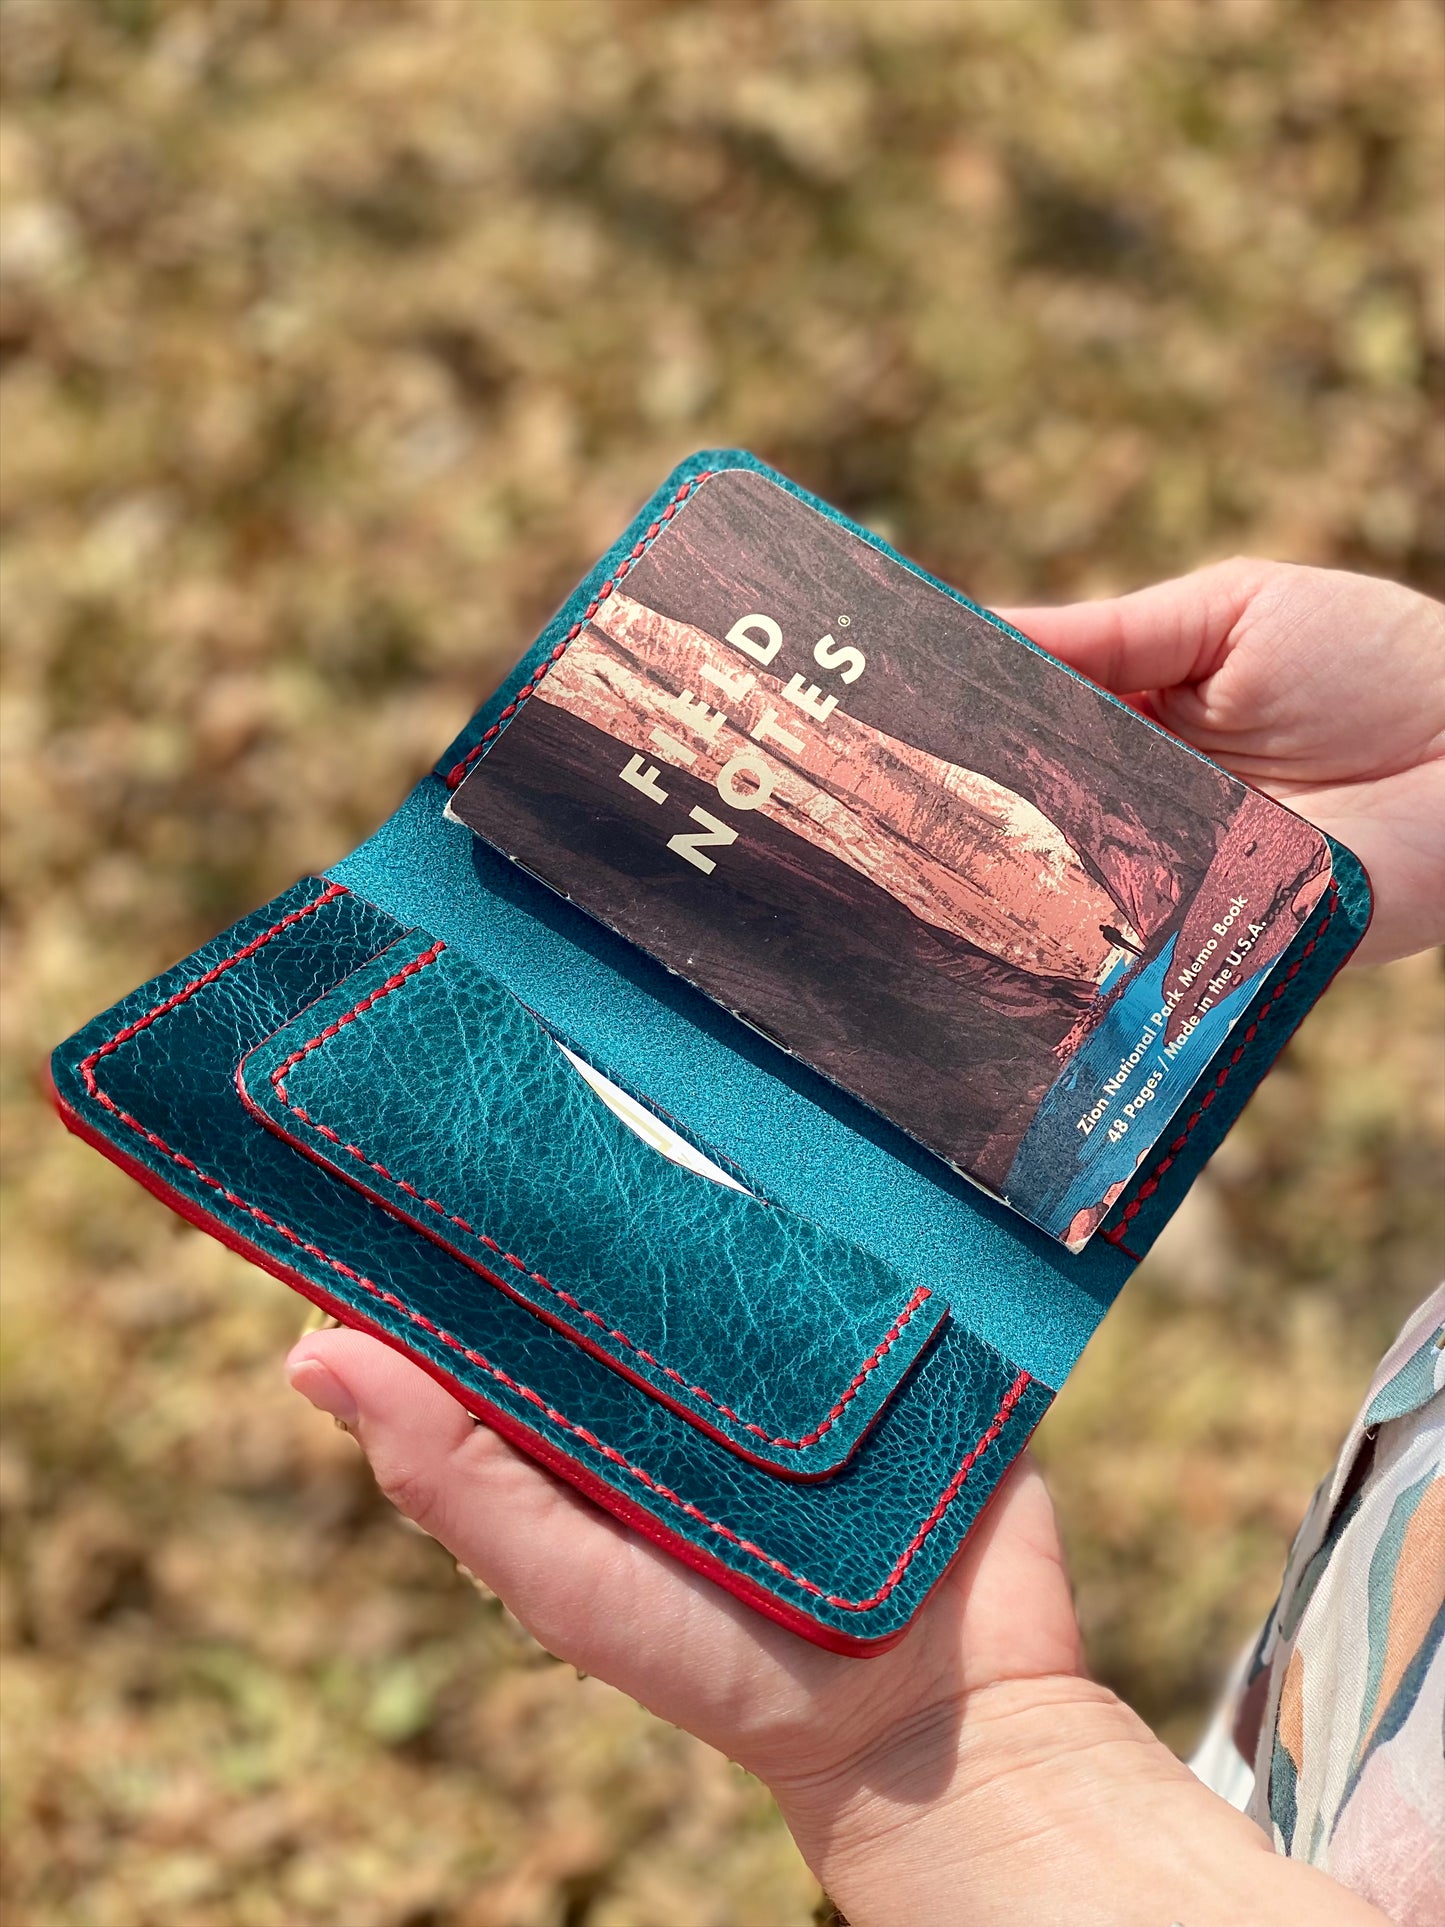 Kaiju Cut and Sew Field Notes/Passport Cover with Credit Card Pocket | Blue Bison Leather | Handmade in Austin, Texas